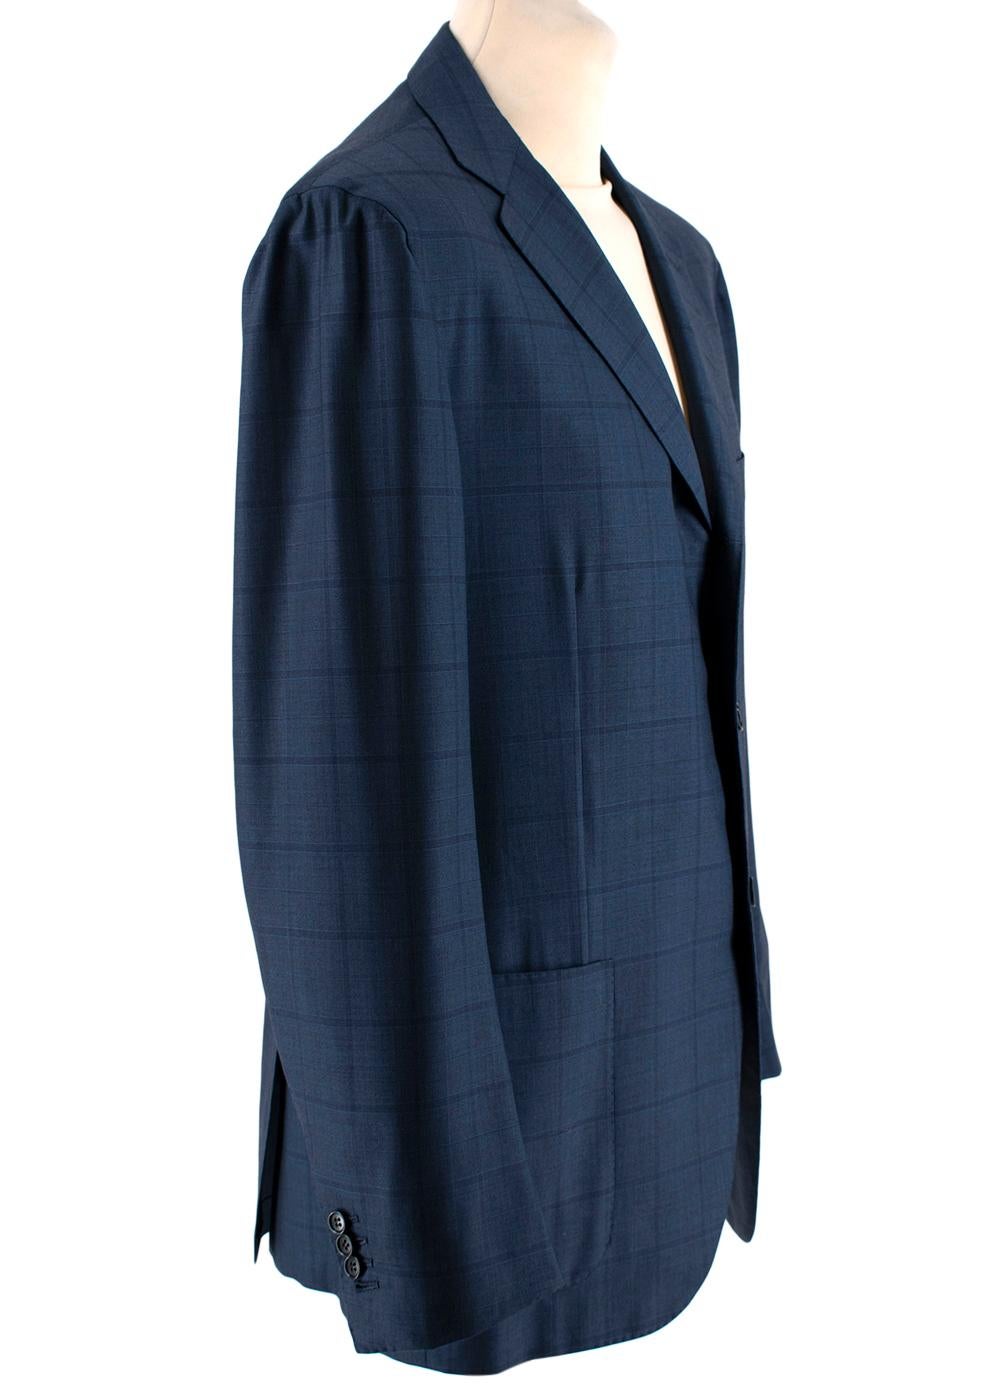 Kiton Napoli Navy Check Wool 2pc Suit
-Soft, luxurious wool material
-Gorgeous navy colour
Jacket:
-Three exterior pockets
-Three interior pockets
-Single-breasted design with three button enclosures
-Four buttons on cuffs
-Vents on back
-Partially